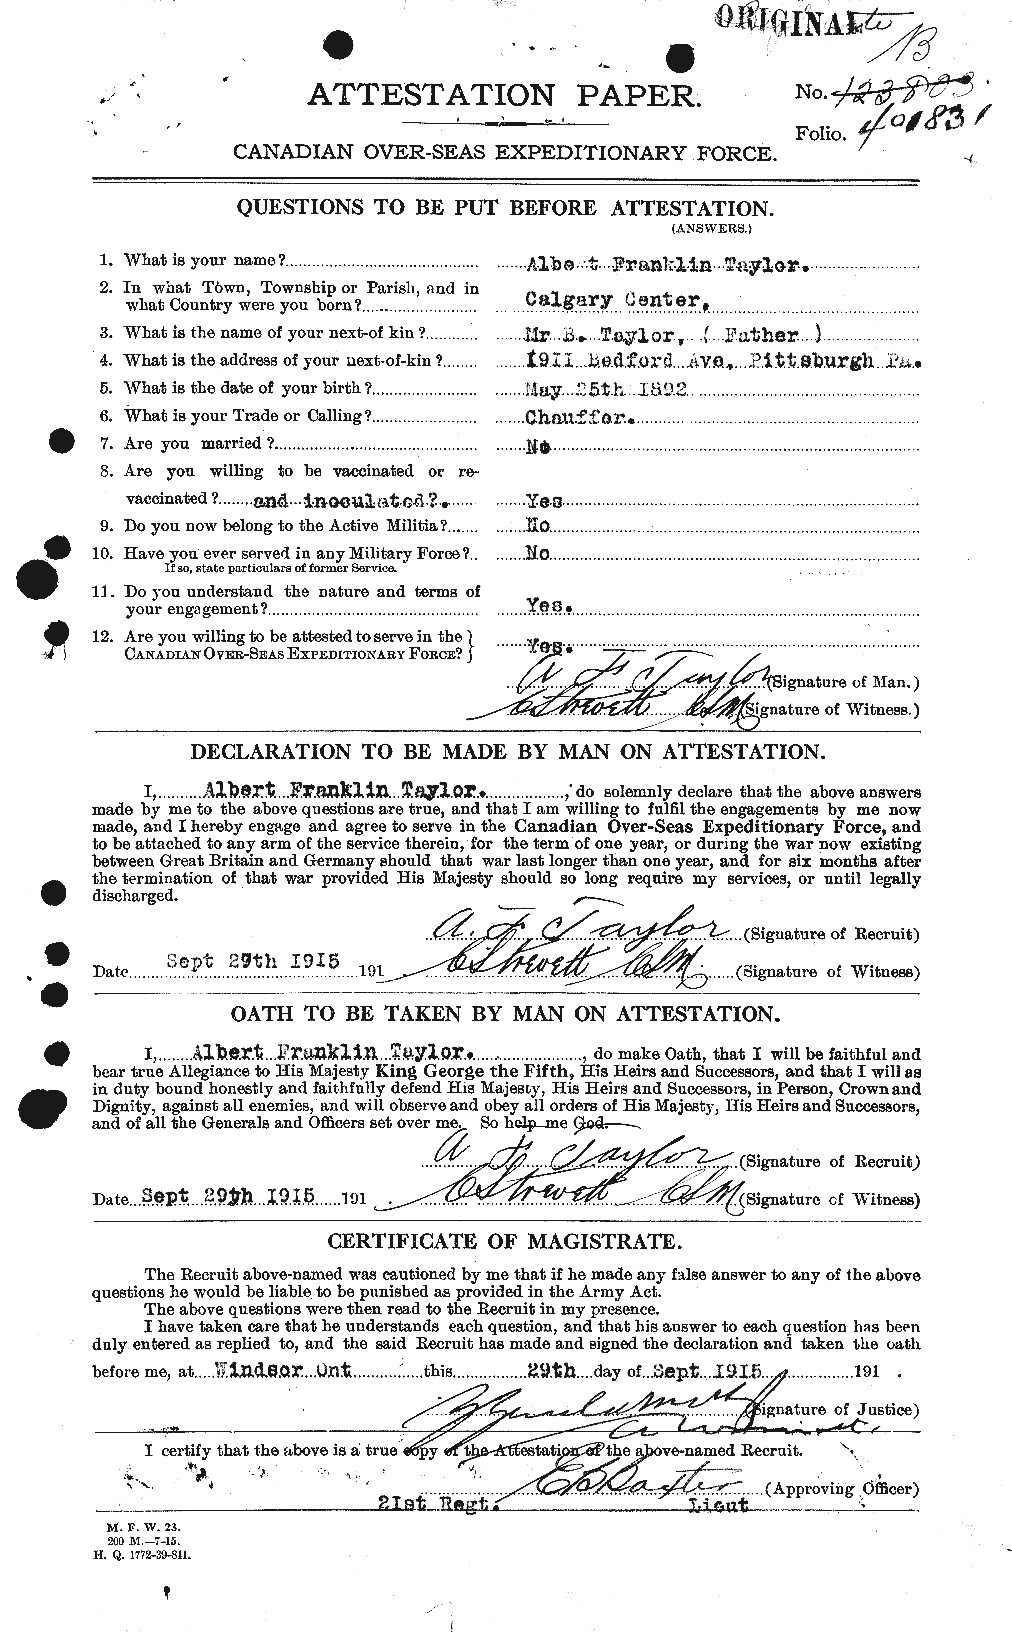 Personnel Records of the First World War - CEF 626111a